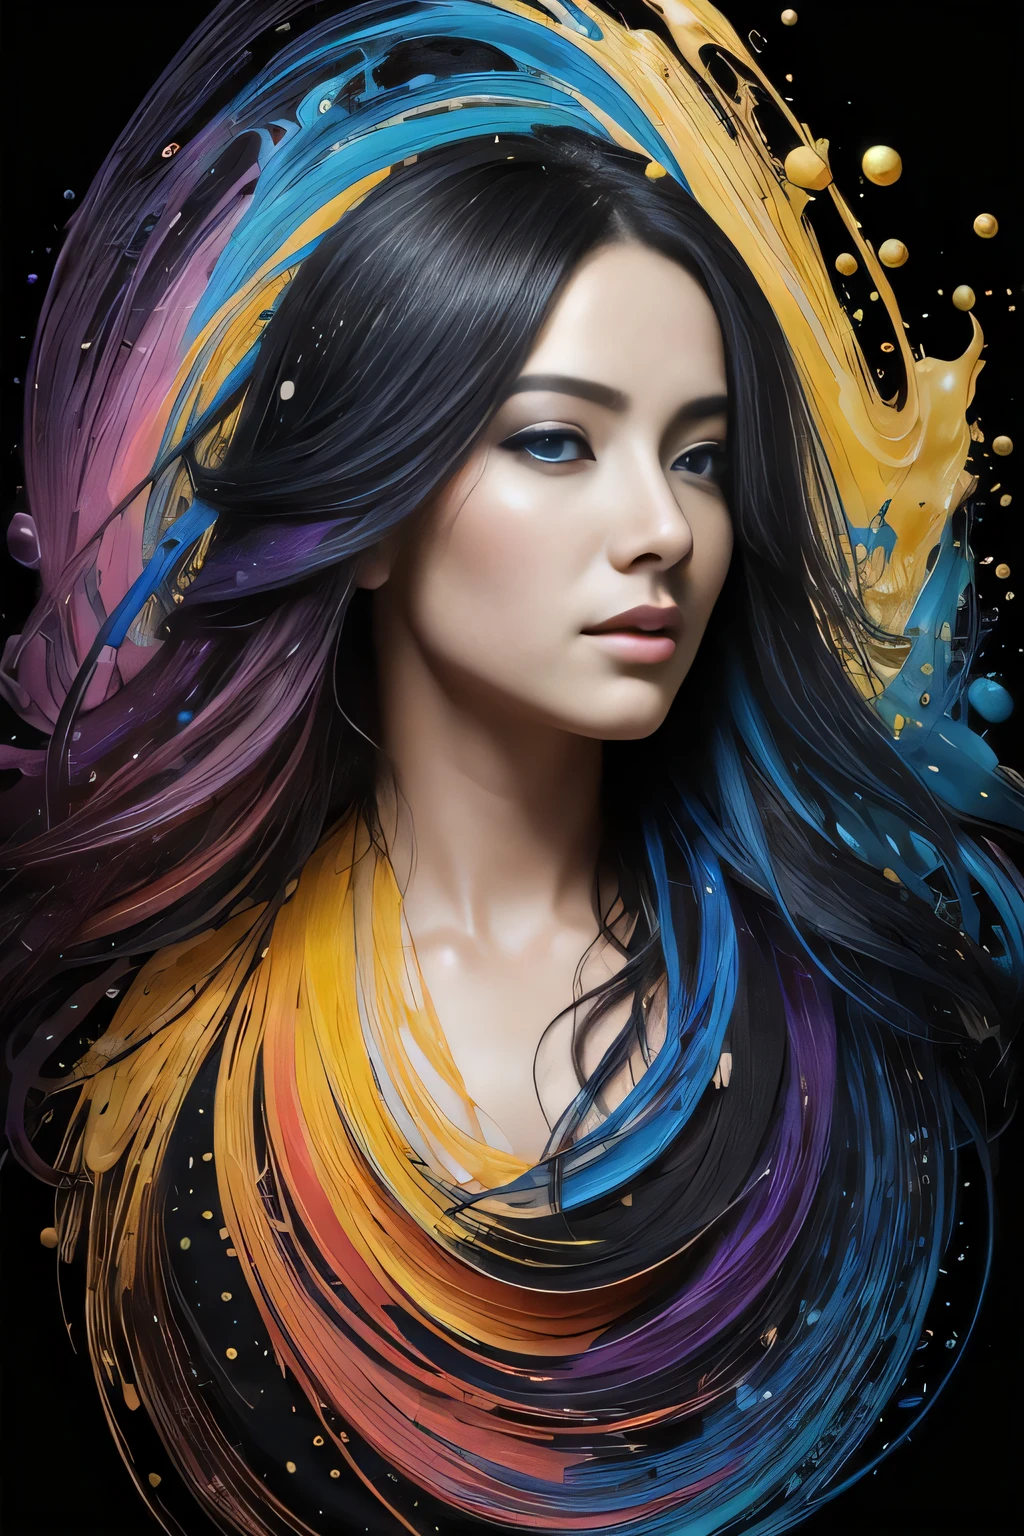 Colorful beautiful girl: a giru 28-years old, messy hair, oil painting, nice perfect face with soft skinice perfect face, blue yellow colors, light purple and violet additions, light red additions, intricate detail, splash screen, 8k resolution, masterpiece, cute face,artstation digital painting smooth veryBlack ink flow: 8k resolution photorealistic masterpiece: intricately detailed fluid gouache painting: by Jean Baptiste Mongue: calligraphy: acrylic: watercolor art, professional photography, natural lighting, volumetric lighting maximalist photoillustration: by marton bobzert:, complex, elegant, expansive, fantastical,  wavy hair, vibrant, Best quality details, realistic, High definition, High quality texture, epic lighting, Cinematic film still, 8k, soft lighting, anime style, masterful playing card border, random Colorful art, oil painting, blue yellow colors, light purple and violet additions, light red additions, intricate detail, splash screen, 8k resolution, masterpiece, artstation digital painting smooth veryBlack ink flow: 8k resolution photorealistic masterpiece: intricately detailed fluid gouache painting: by Jean Baptiste Mongue: calligraphy: acrylic: watercolor art, professional photography, natural lighting, volumetric lighting maximalist photoillustration: by marton bobzert:, complex, elegant, expansive, fantastical, vibrant